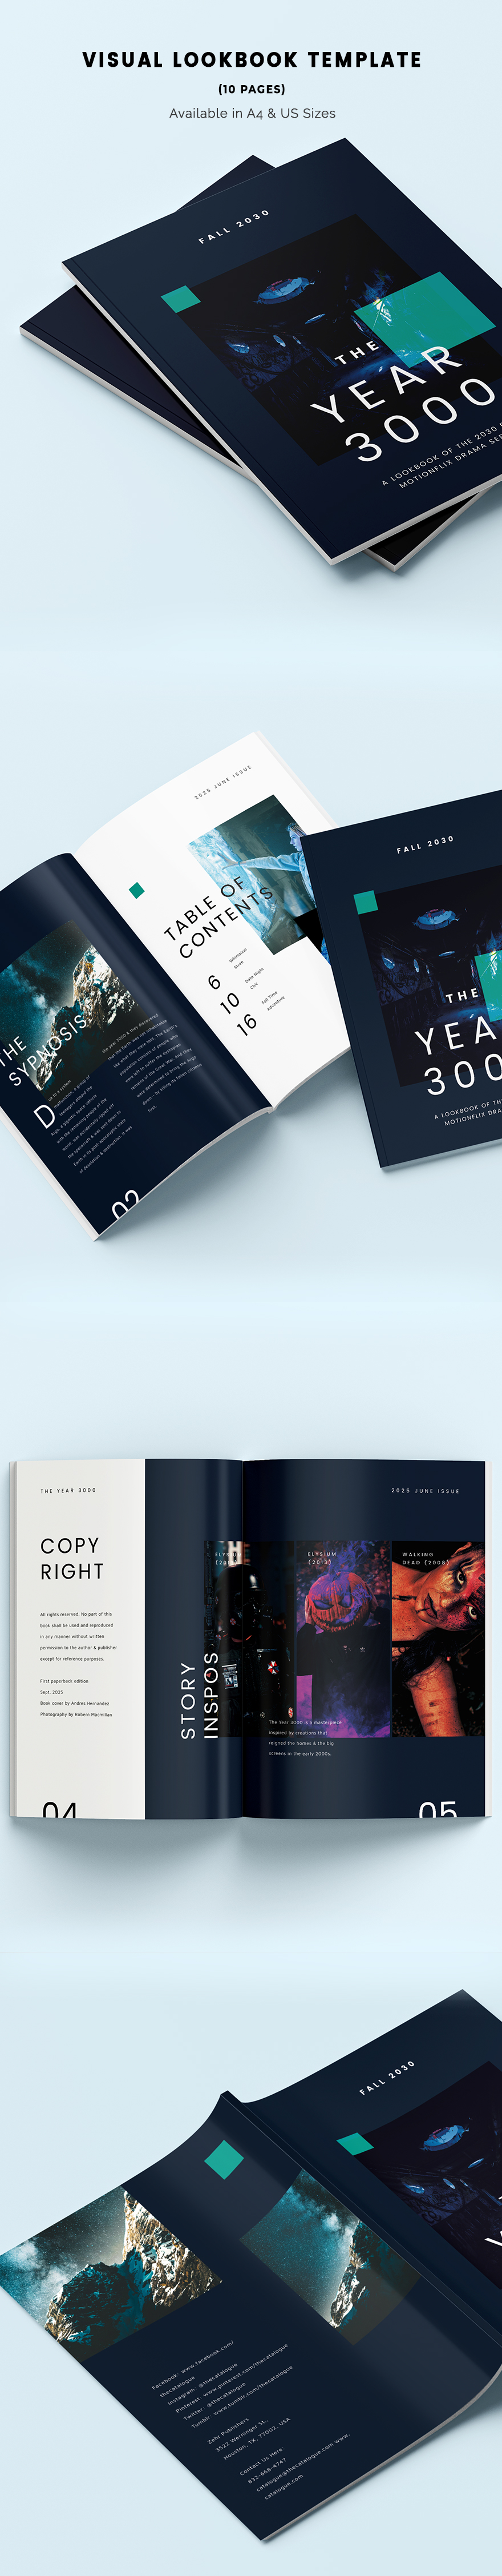 Visual Lookbook Template - InDesign, Word, Apple Pages, Publisher ...